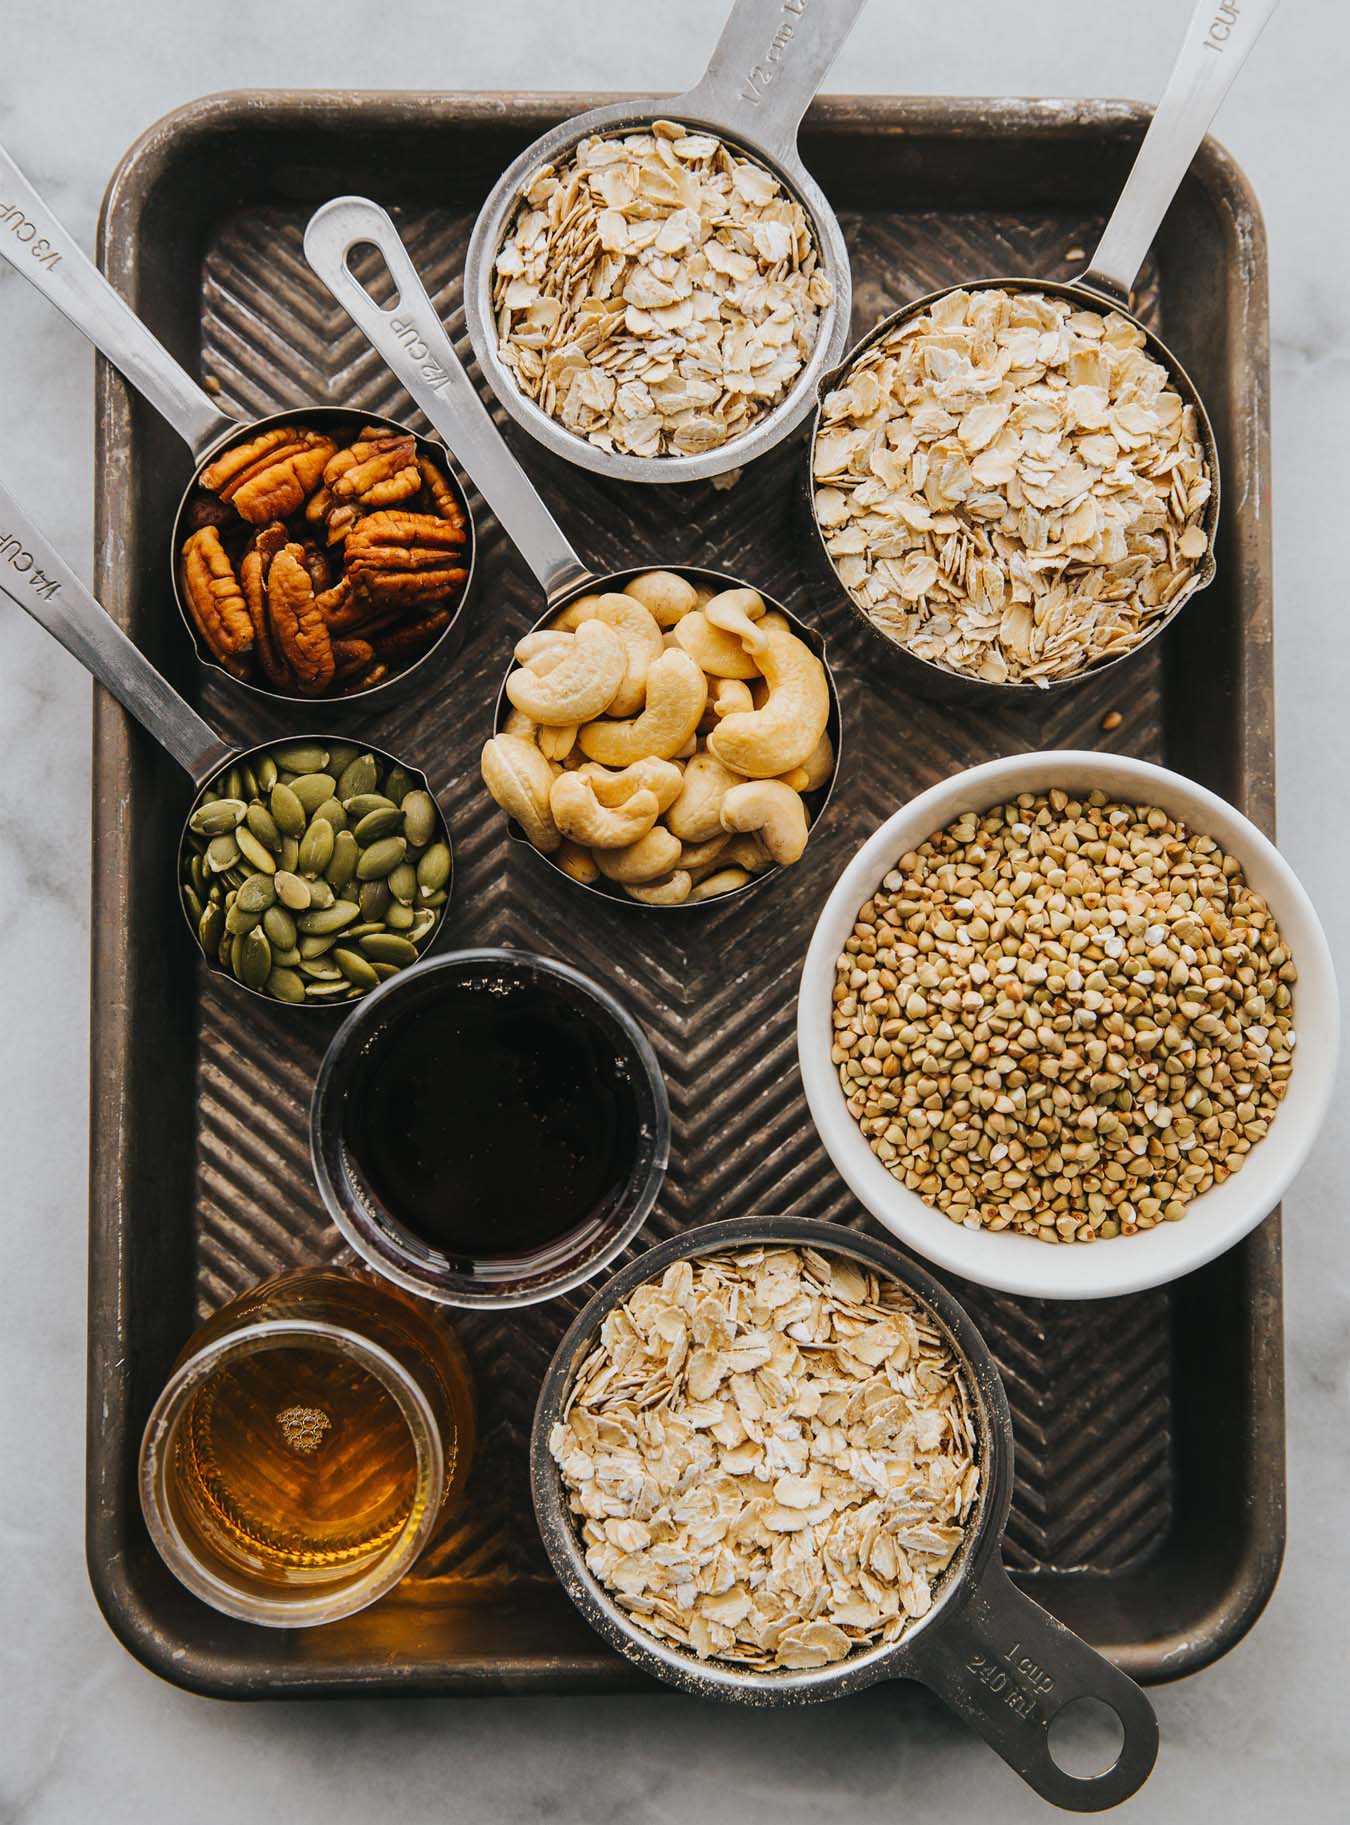 On an old baking sheet are small bowls with various ingredients such as cashews, buckwheat, oatmeal, pecans and pumpkin seeds.